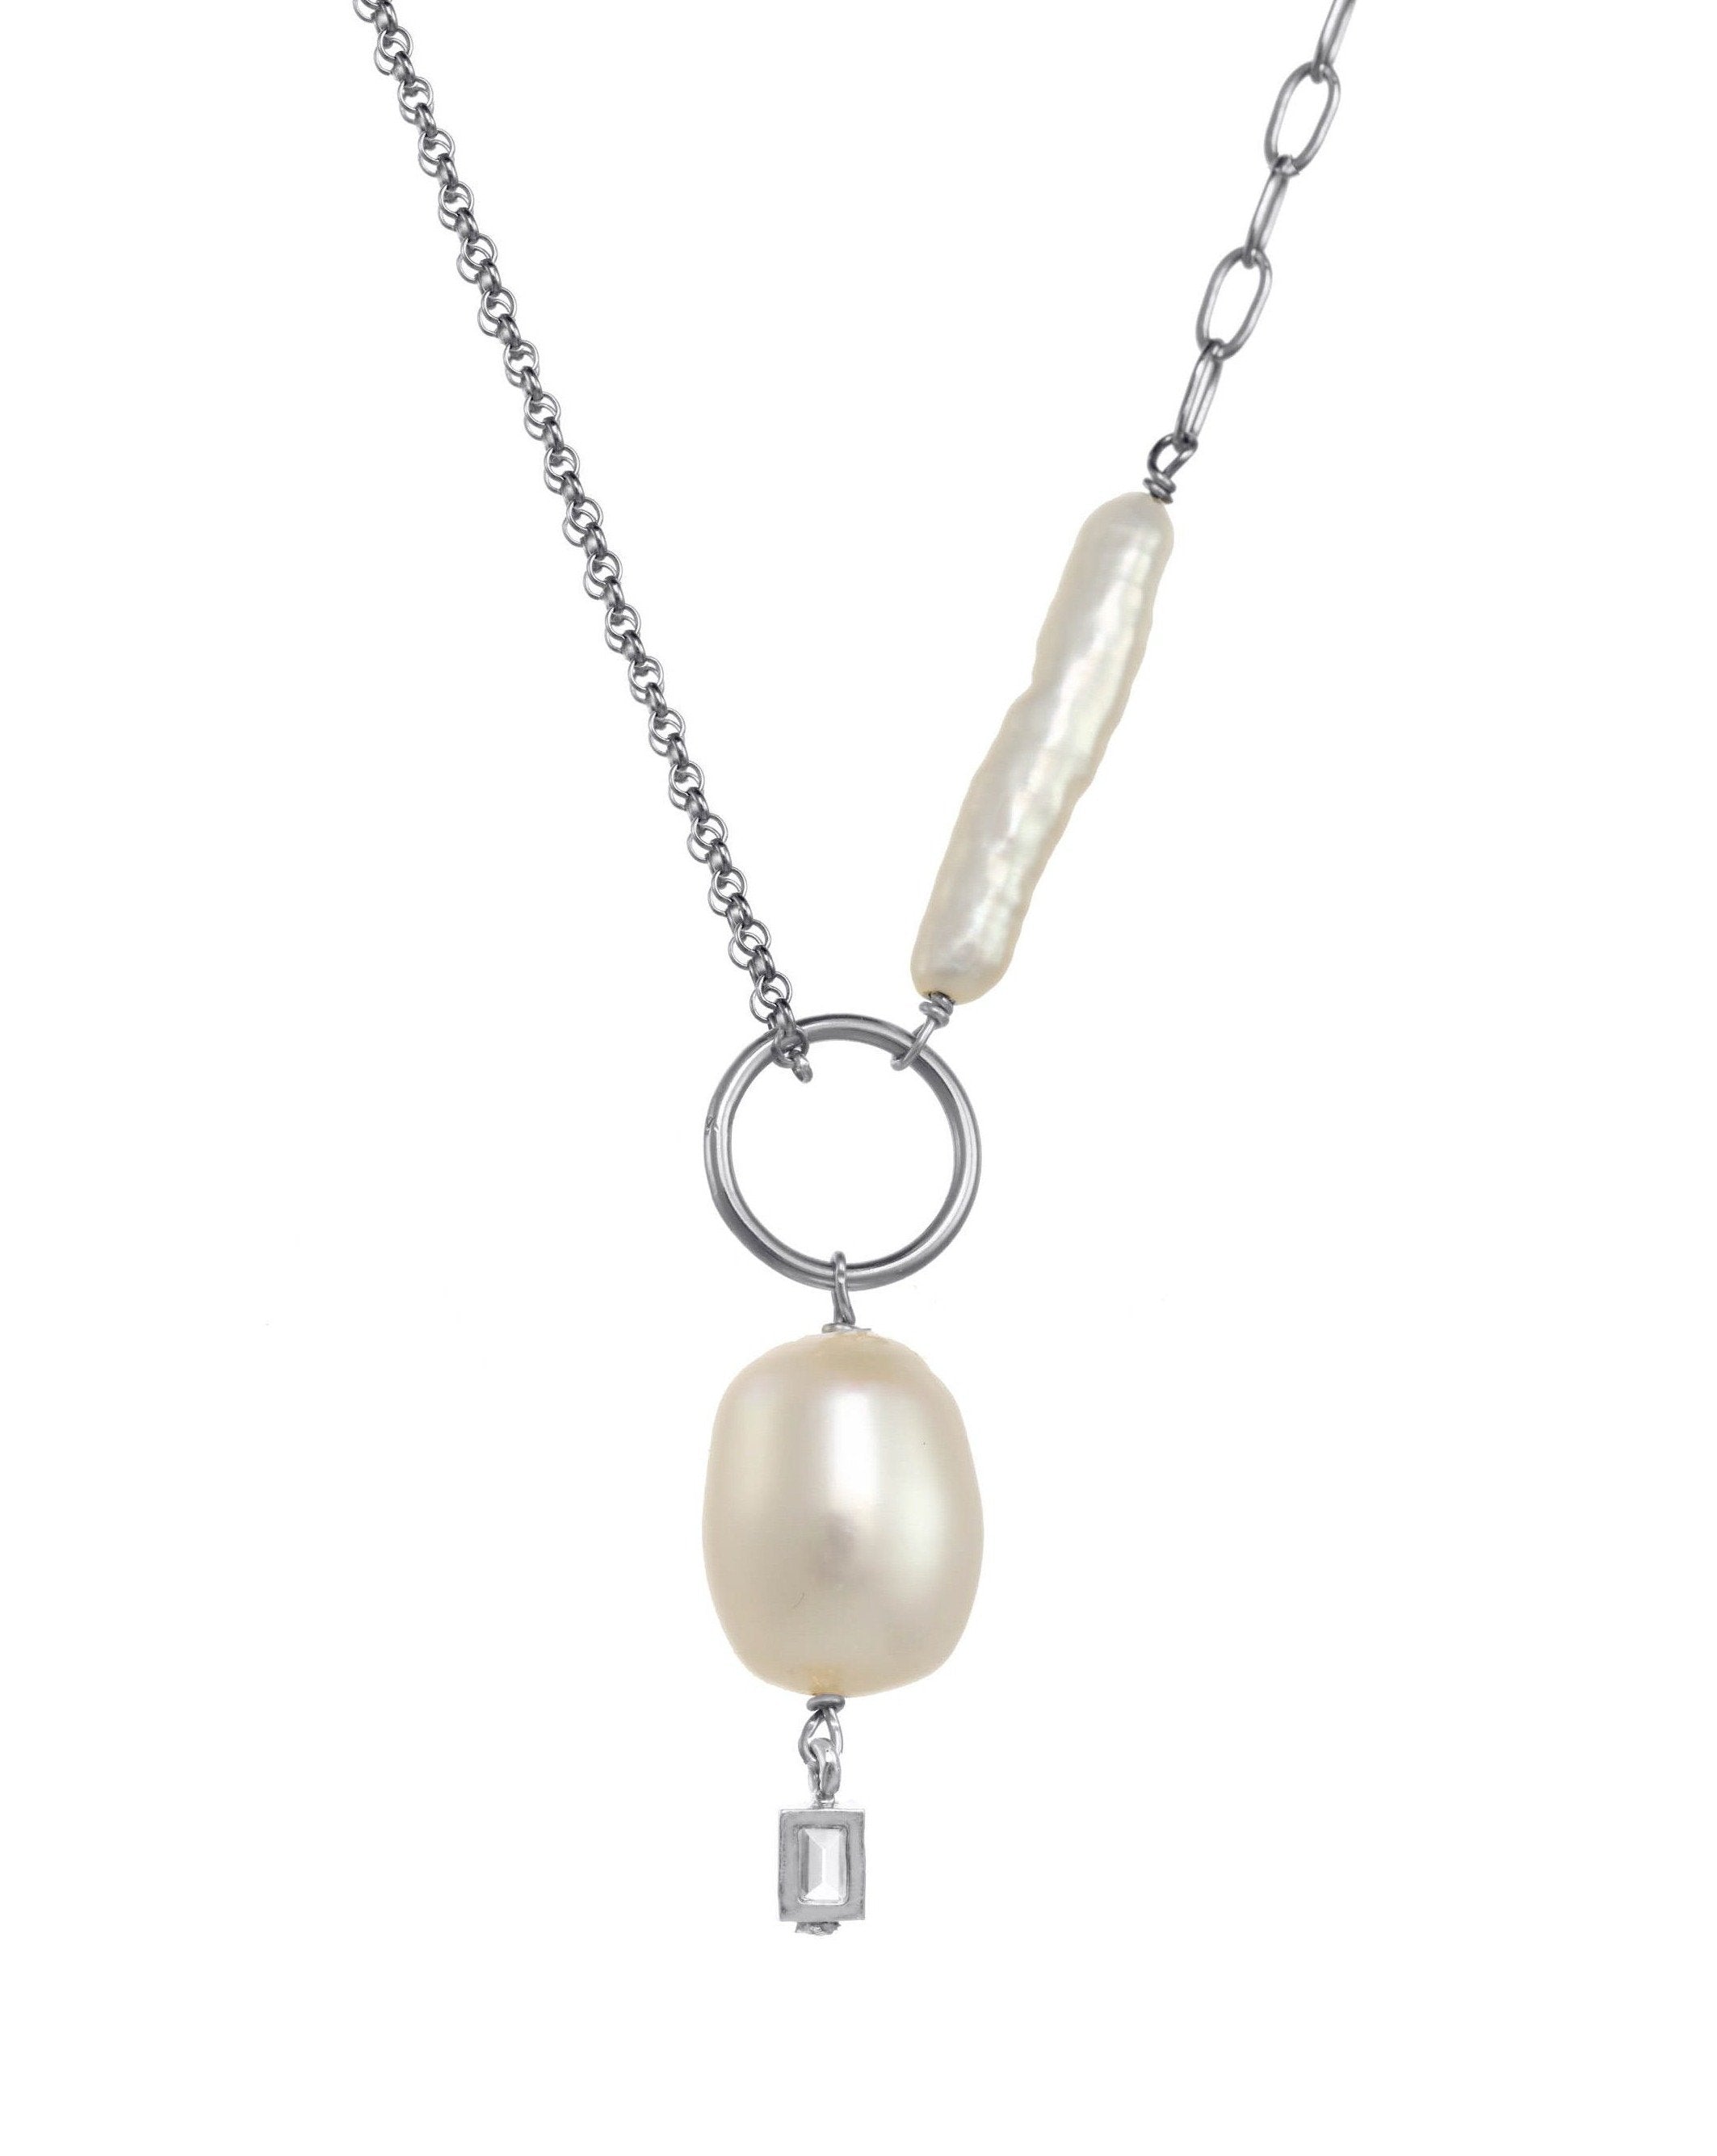 Darita Necklace by KOZAKH. A 16 to 18 inch adjustable length necklace in Sterling Silver, featuring a Biwa Pearl, a 6x9mm white oval shaped Pearl, and a 3mm rectangle cut Cubic Zirconia.